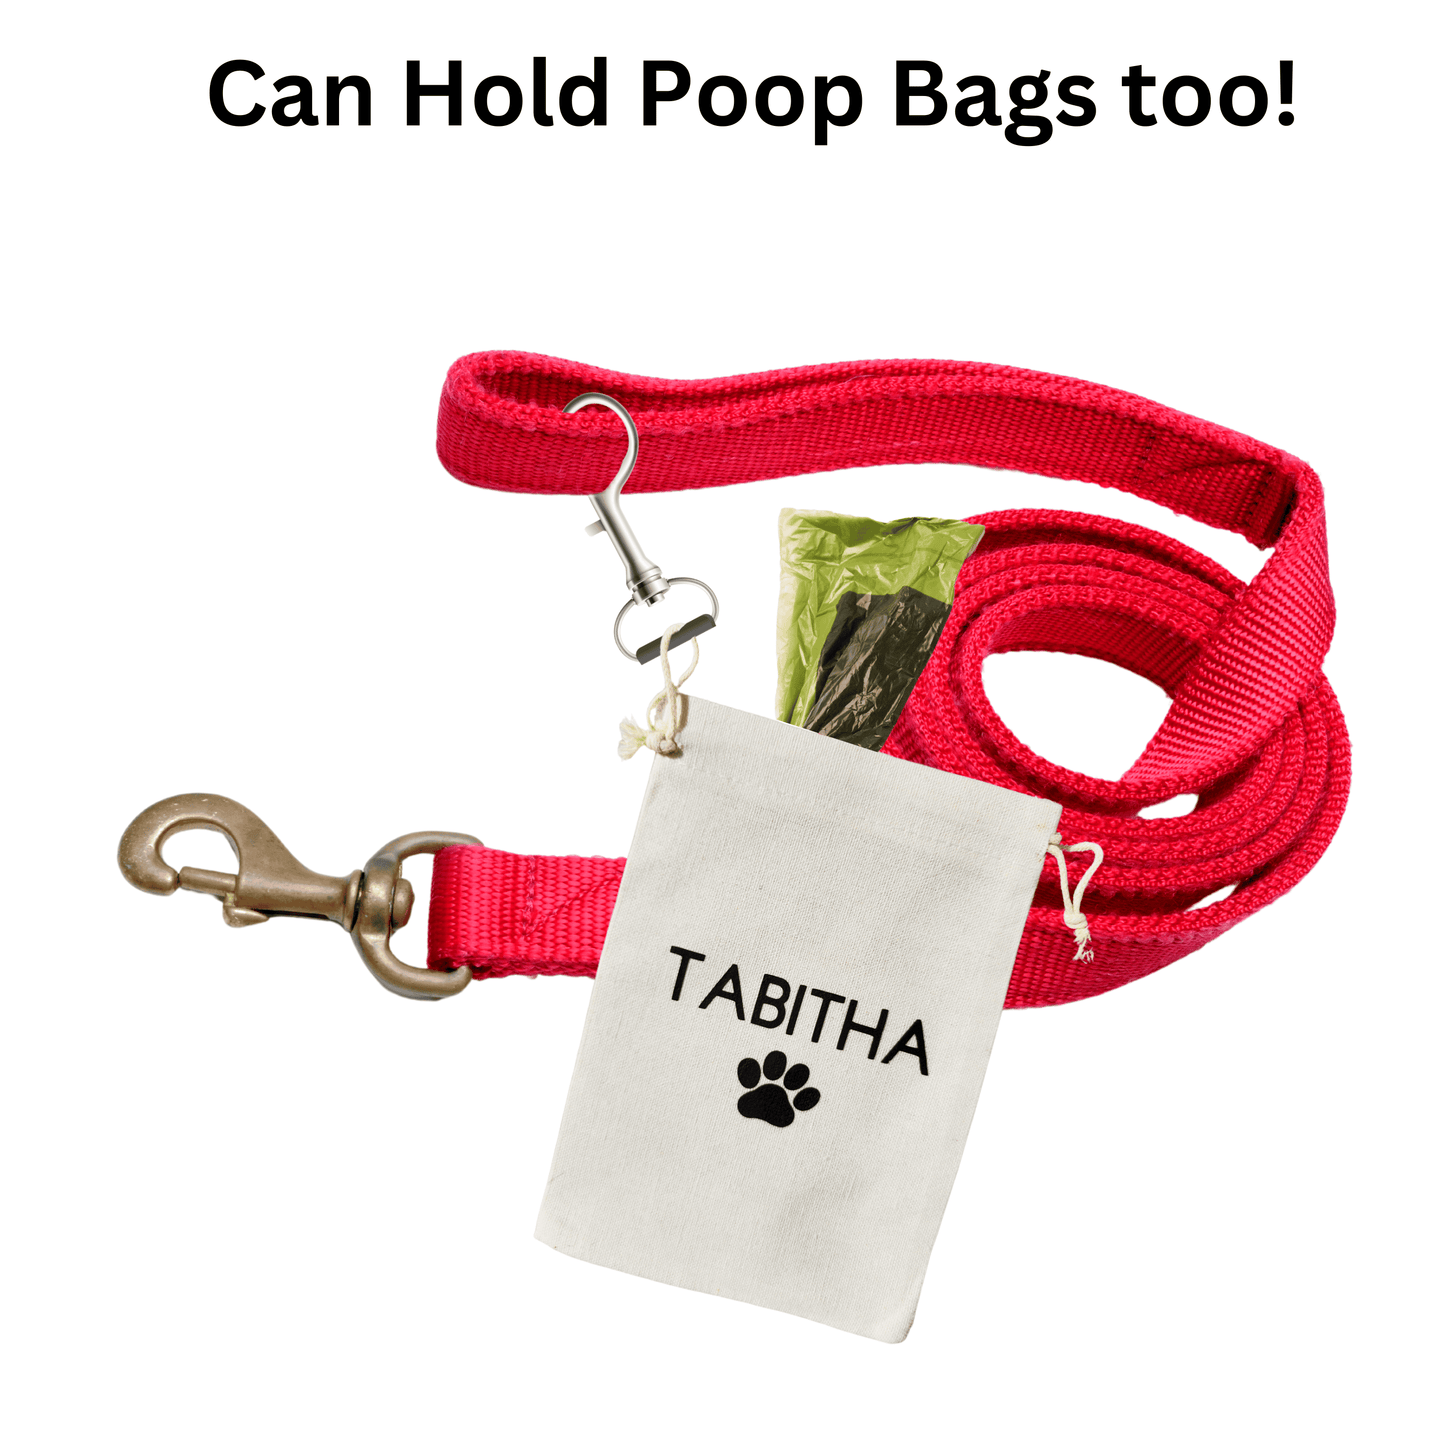 Dog Treat Clip Pouch For Leash Training Or Poop Bag Solution